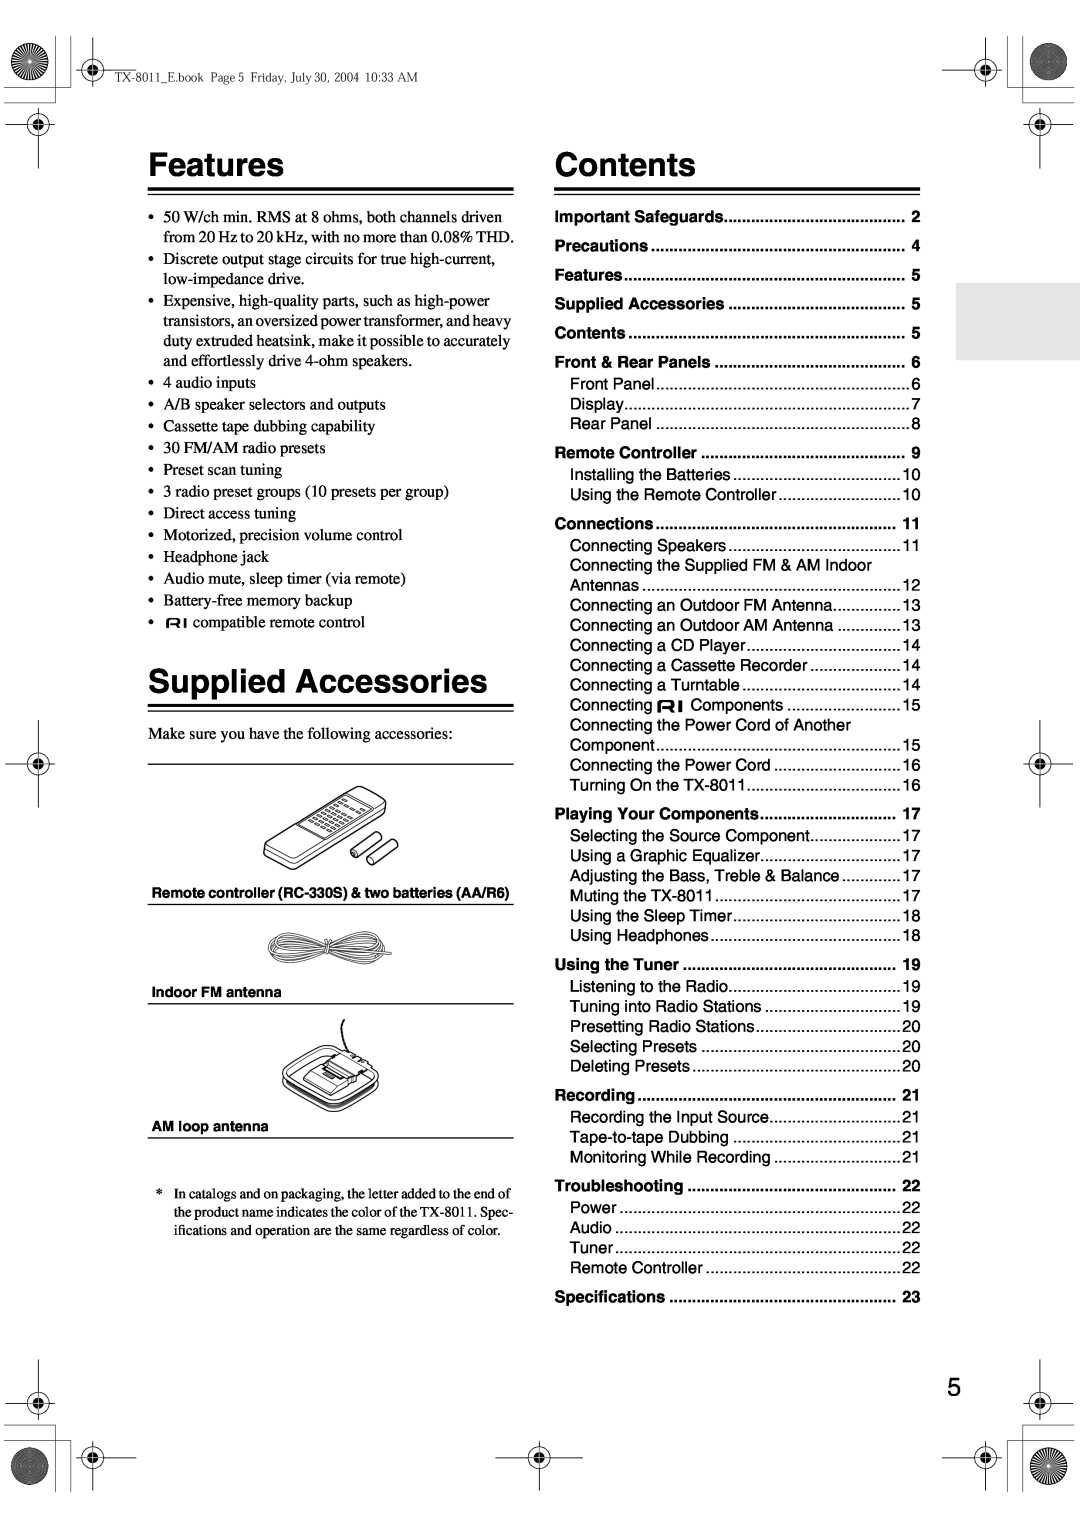 Onkyo TX-8011 instruction manual Features, Supplied Accessories, Contents 